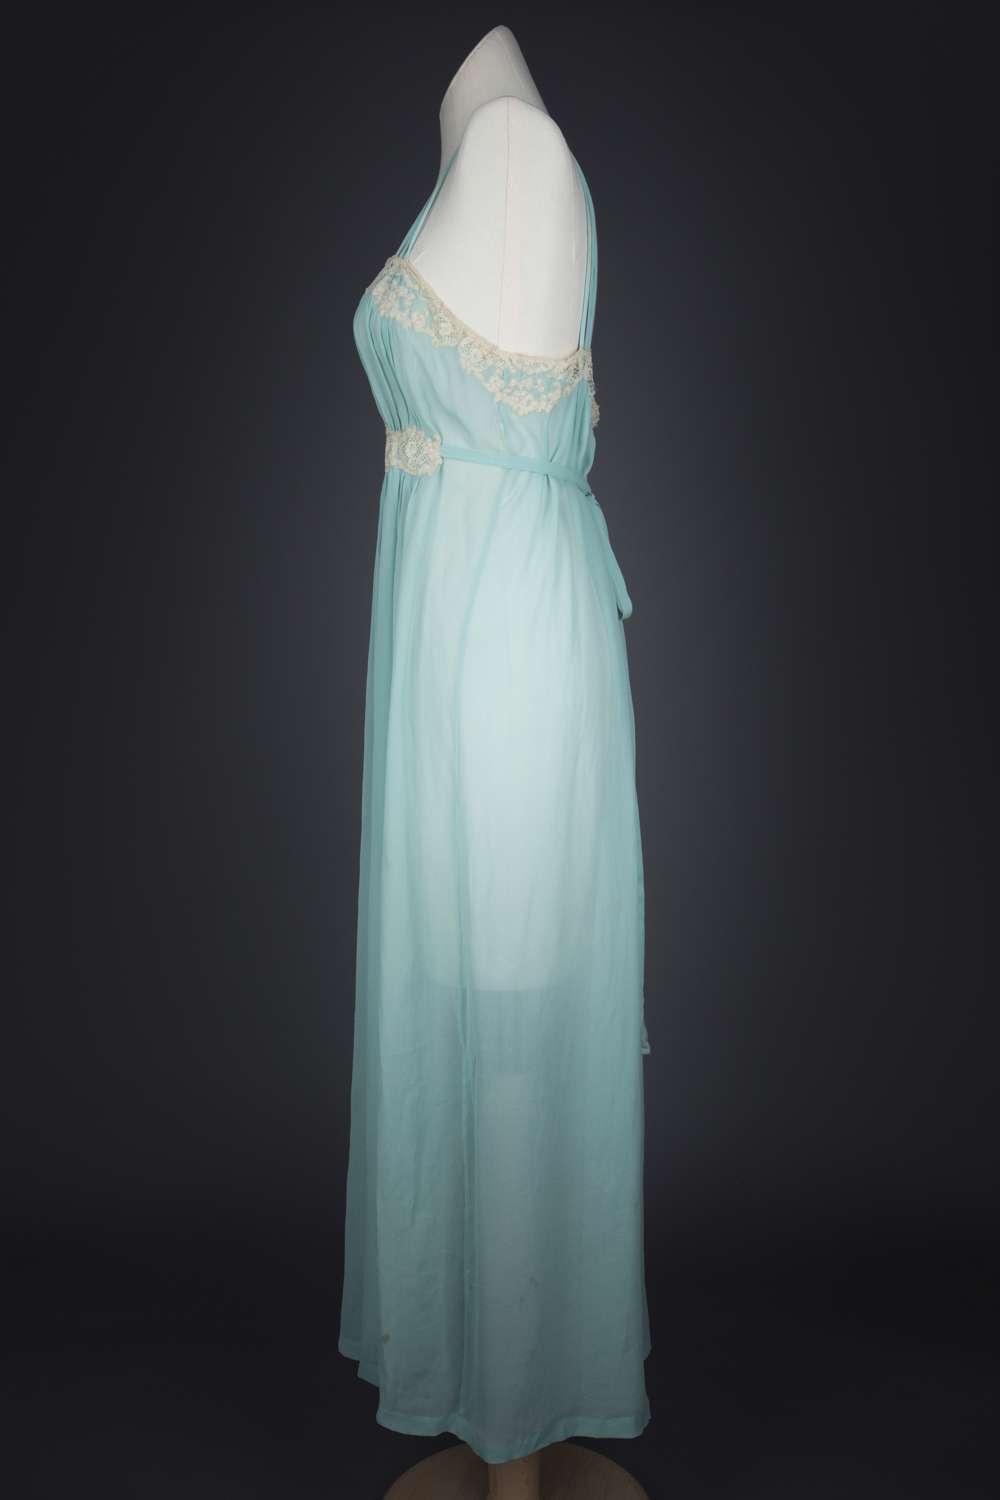 Pleated Silk Georgette Gown With Lace Appliqué by Juel Park, c. 1940s, USA. The Underpinnings Museum. Photography by Tigz Rice.